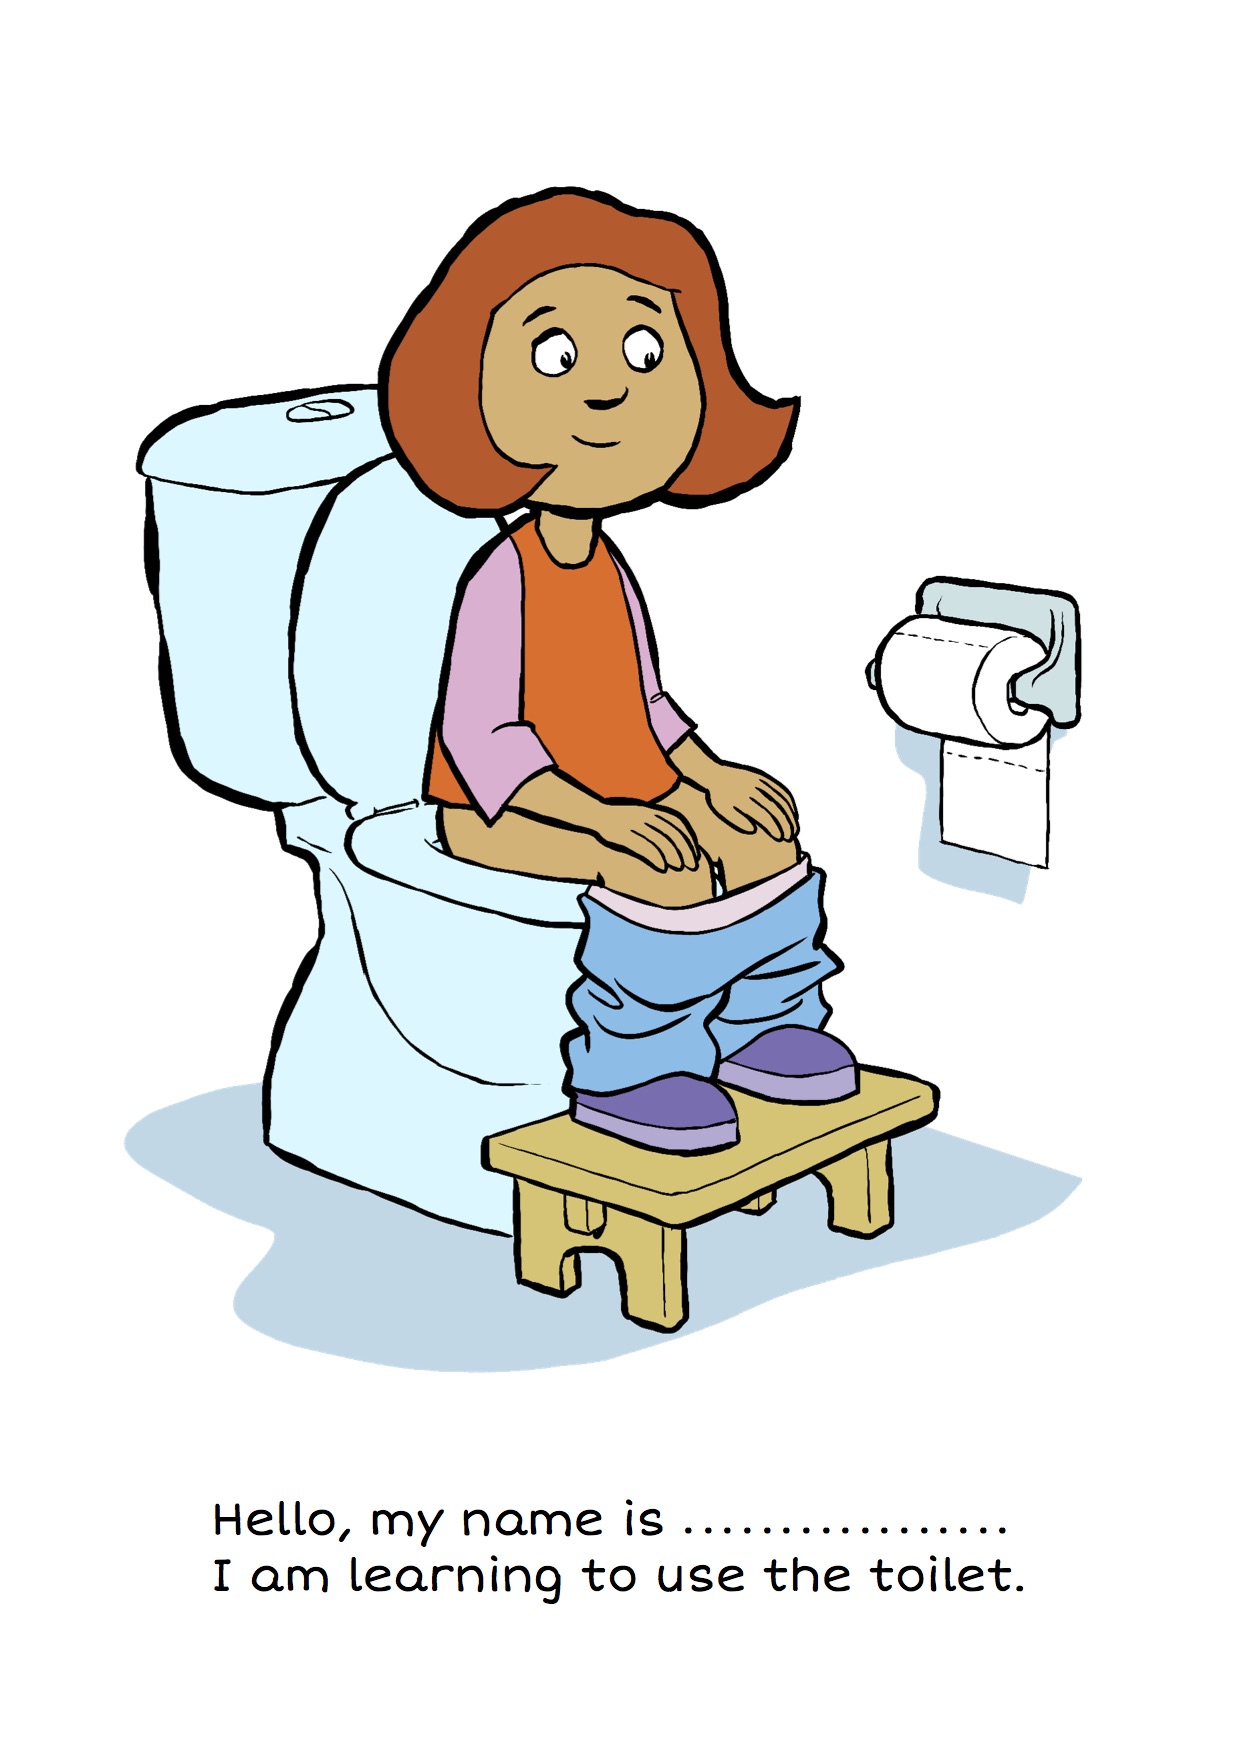 Toilet Time: A story for girls learning to use the toilet for wee and poo